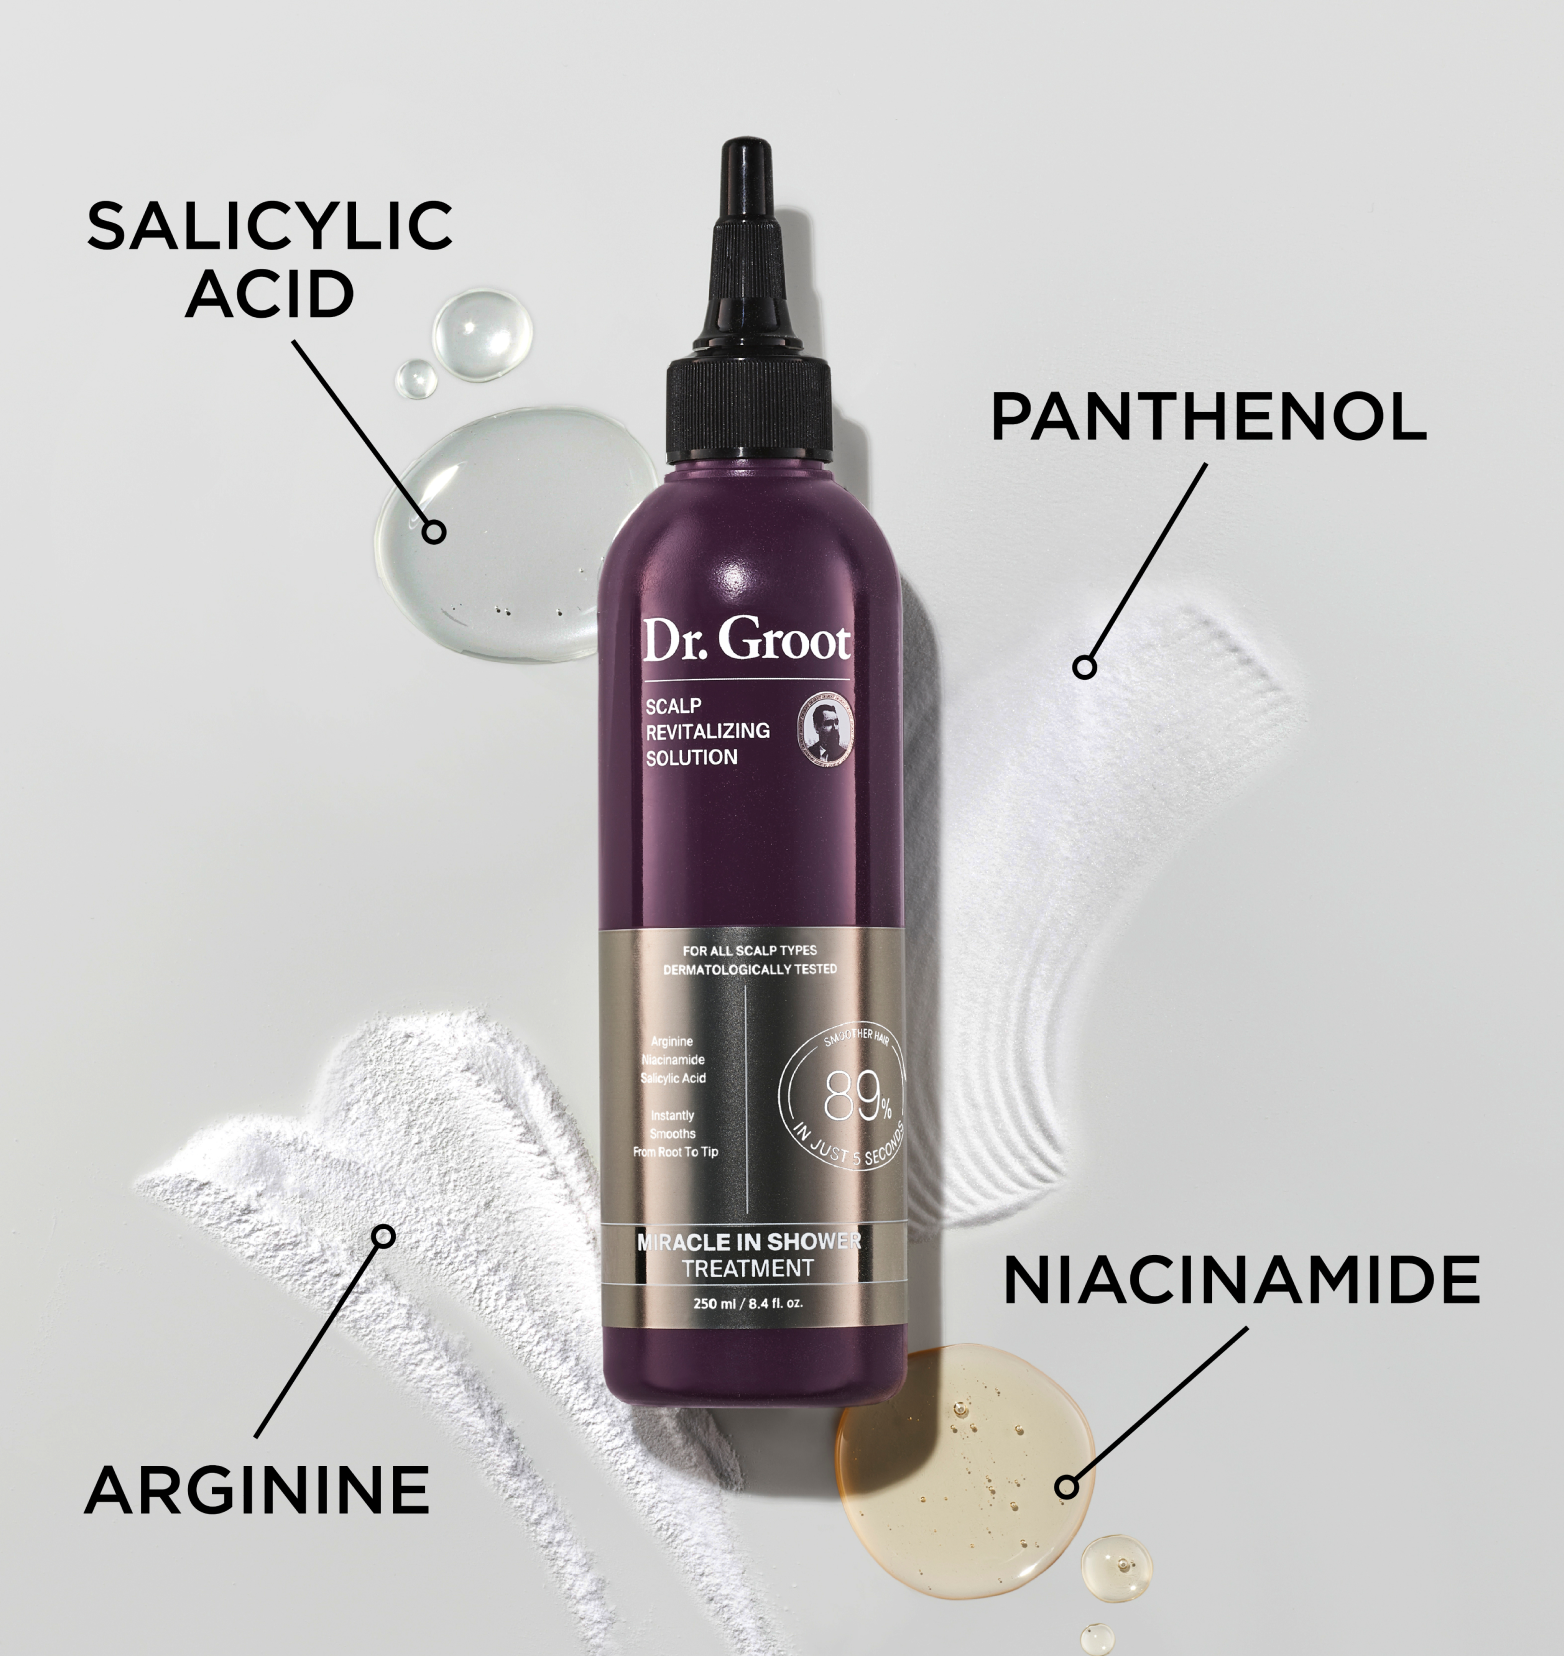 A dark purple bottle of Dr. Groot Miracle In Shower Treatment rests on a spread of panthenol, drop of salicylic acid, a drop of niacinamide, and a spread of arginine..